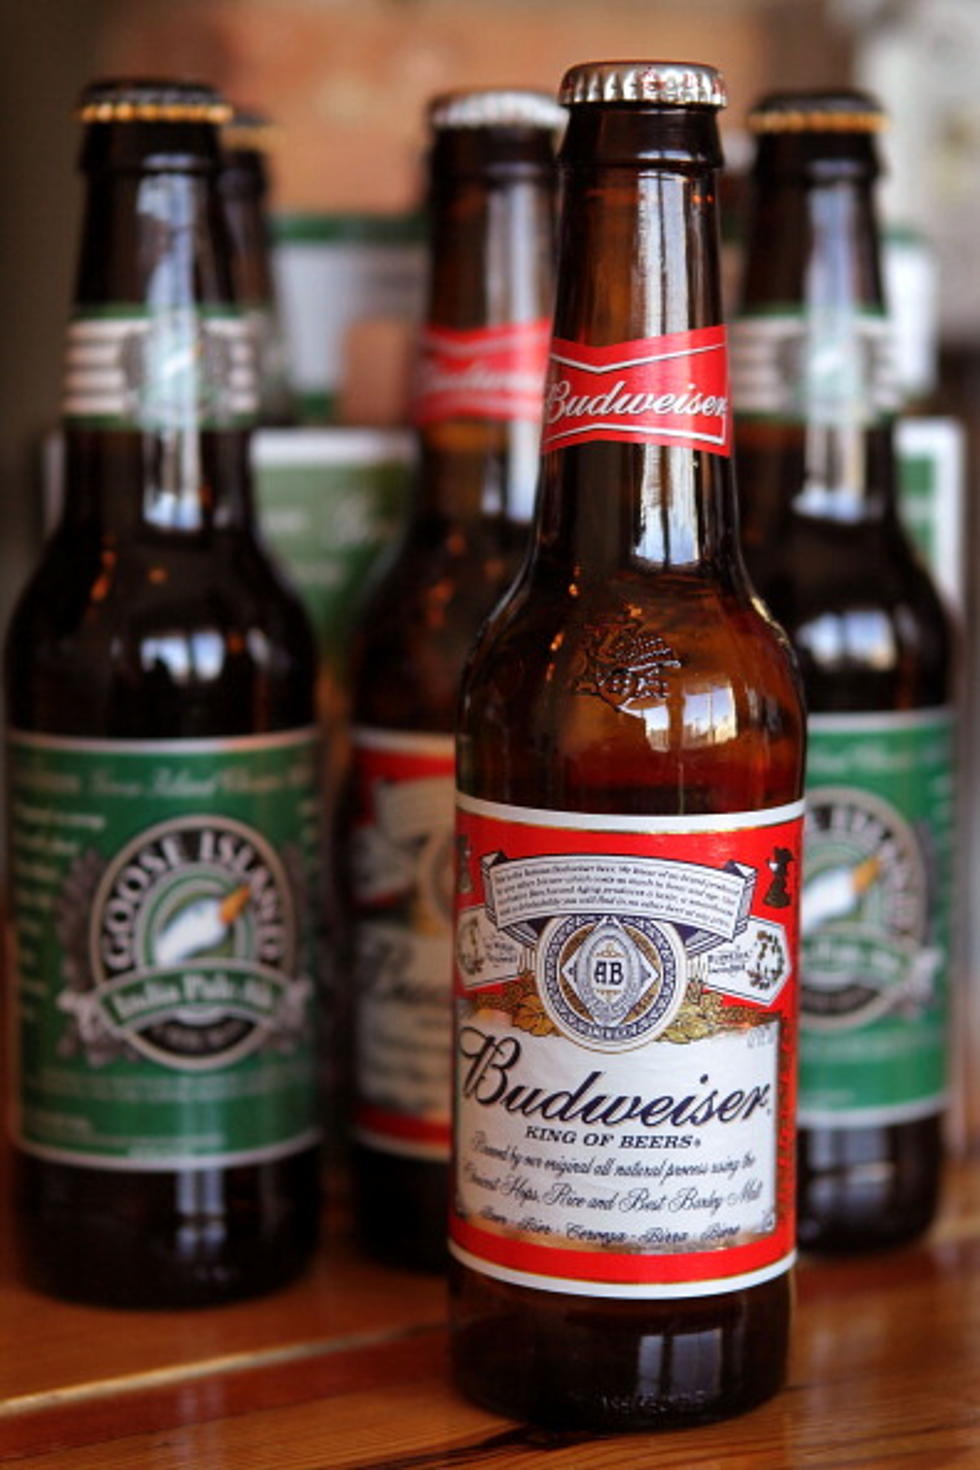 69% of Americans are Patriotic When It Comes To Choosing a Beer